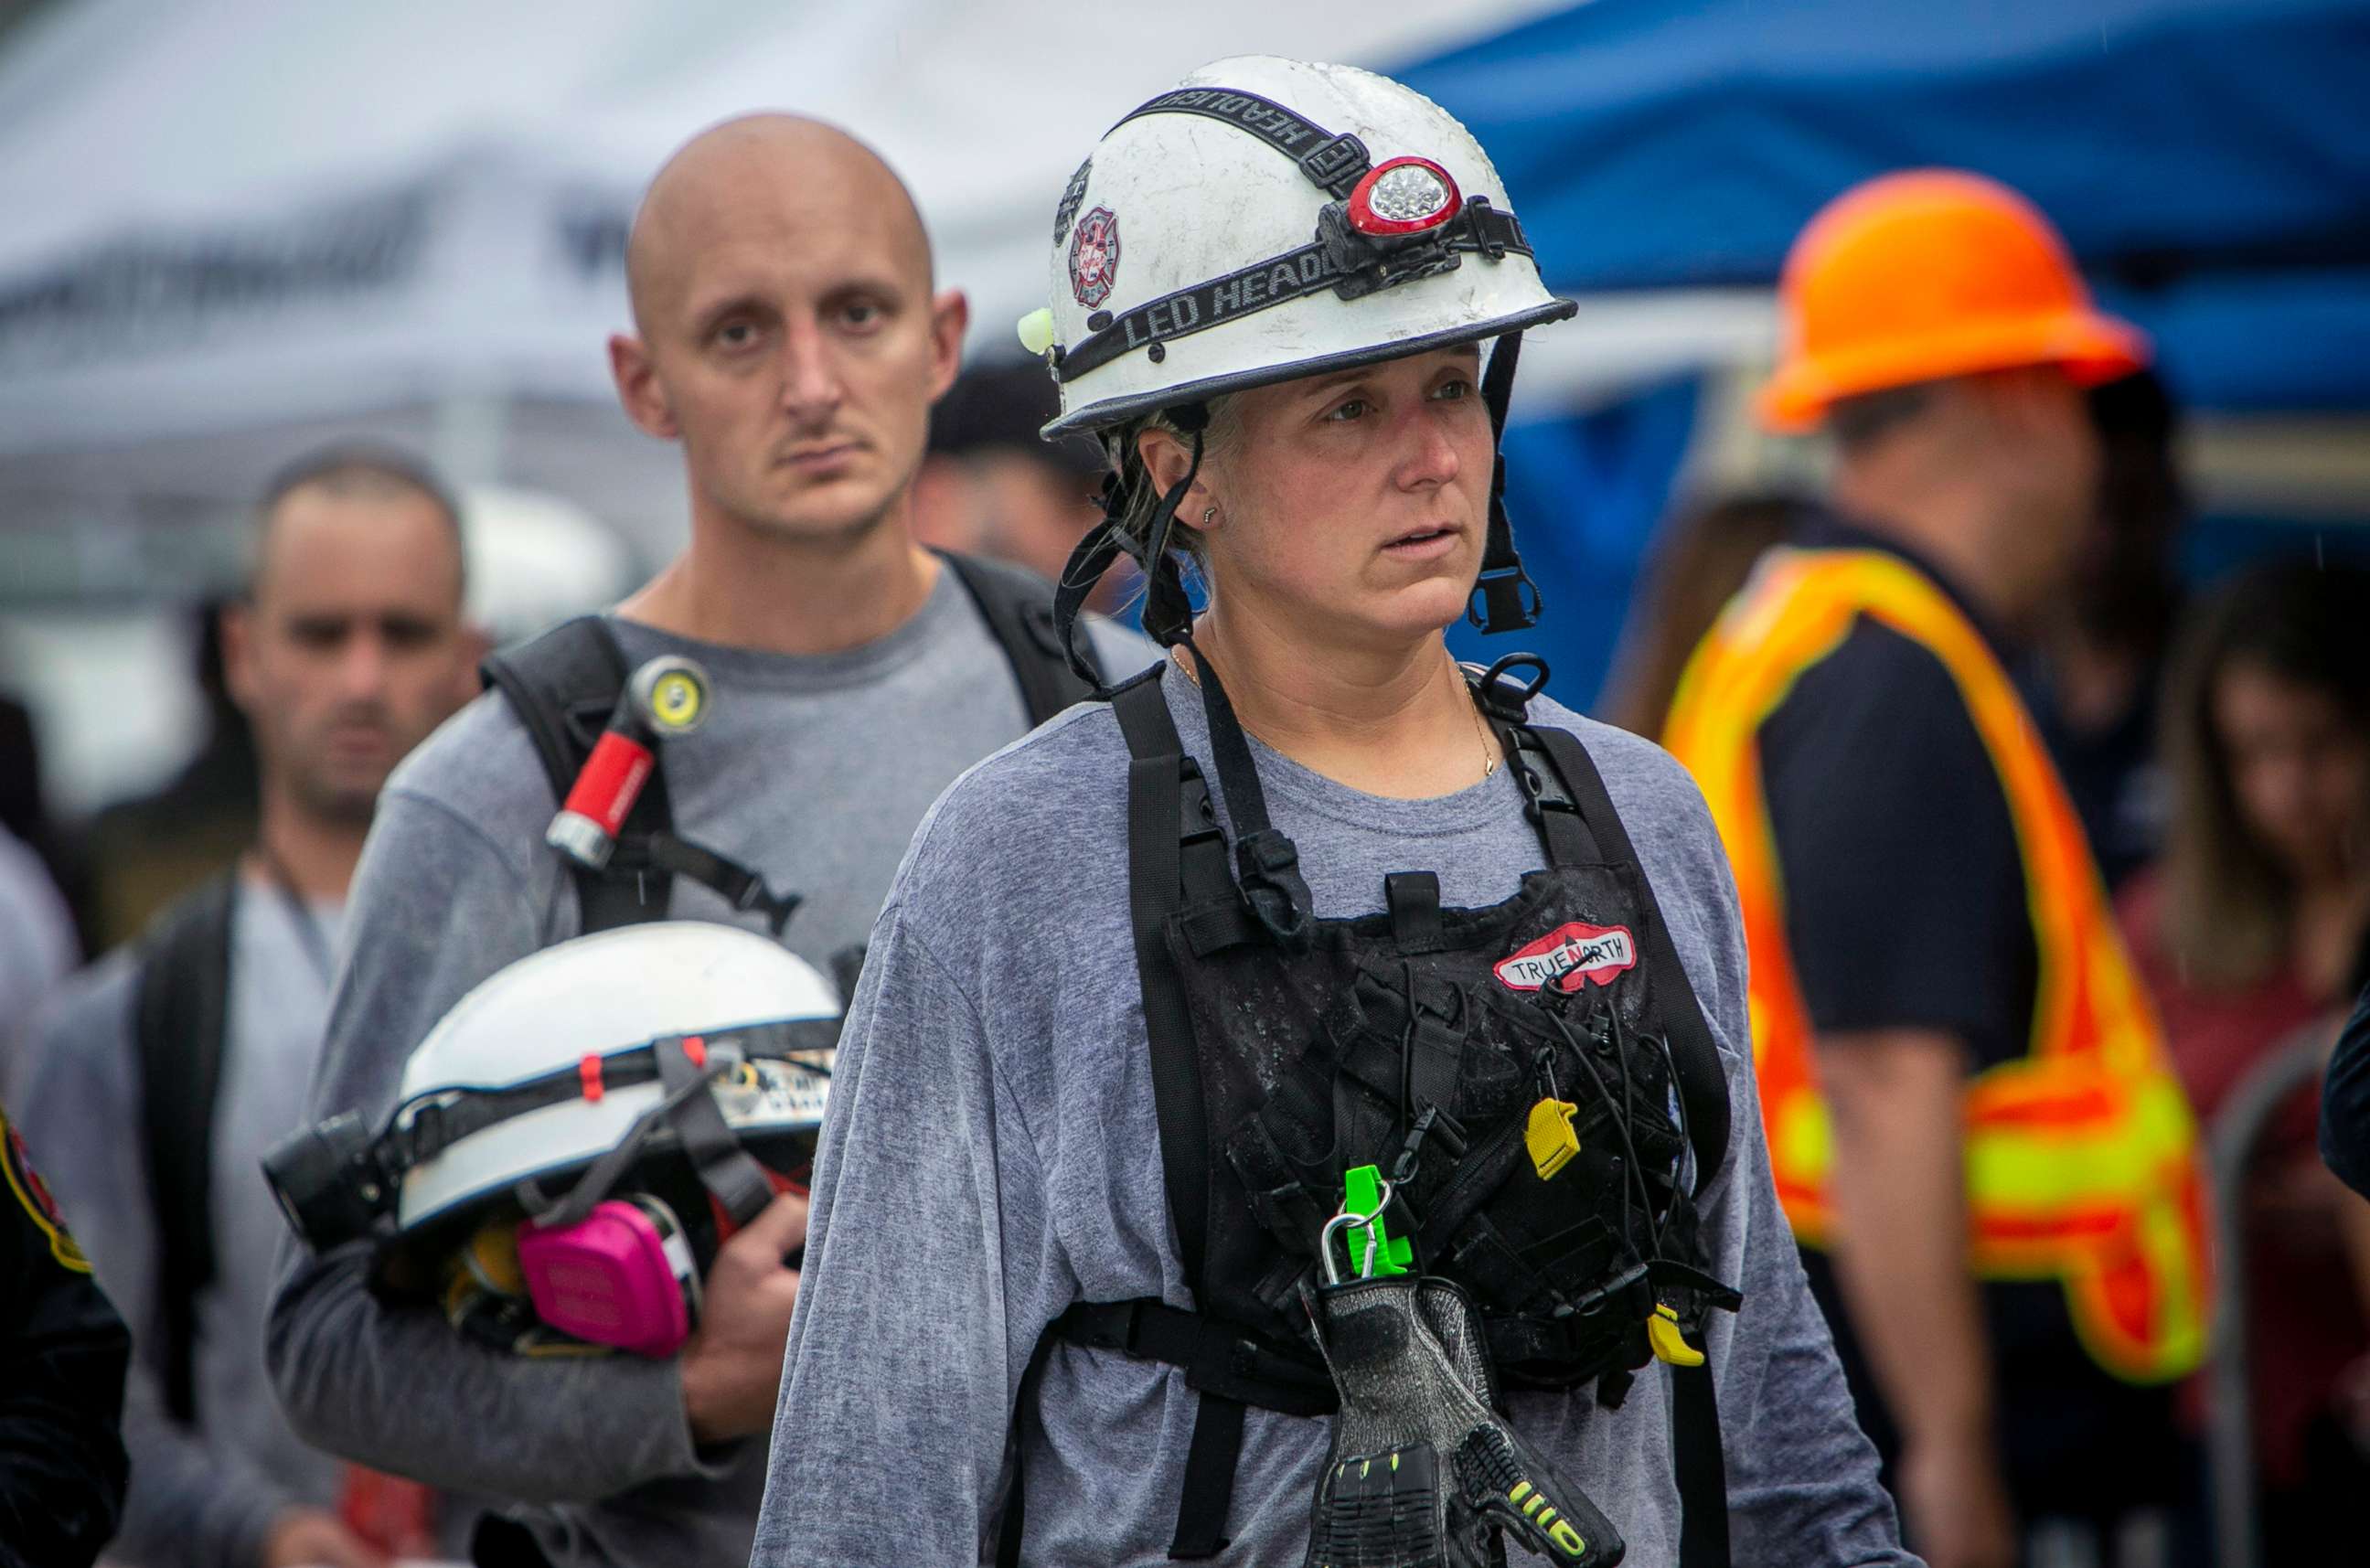 PHOTO: Members of a search and rescue team come off the site of the collapse after their shift in Surfside, Fla., June 30, 2021. 